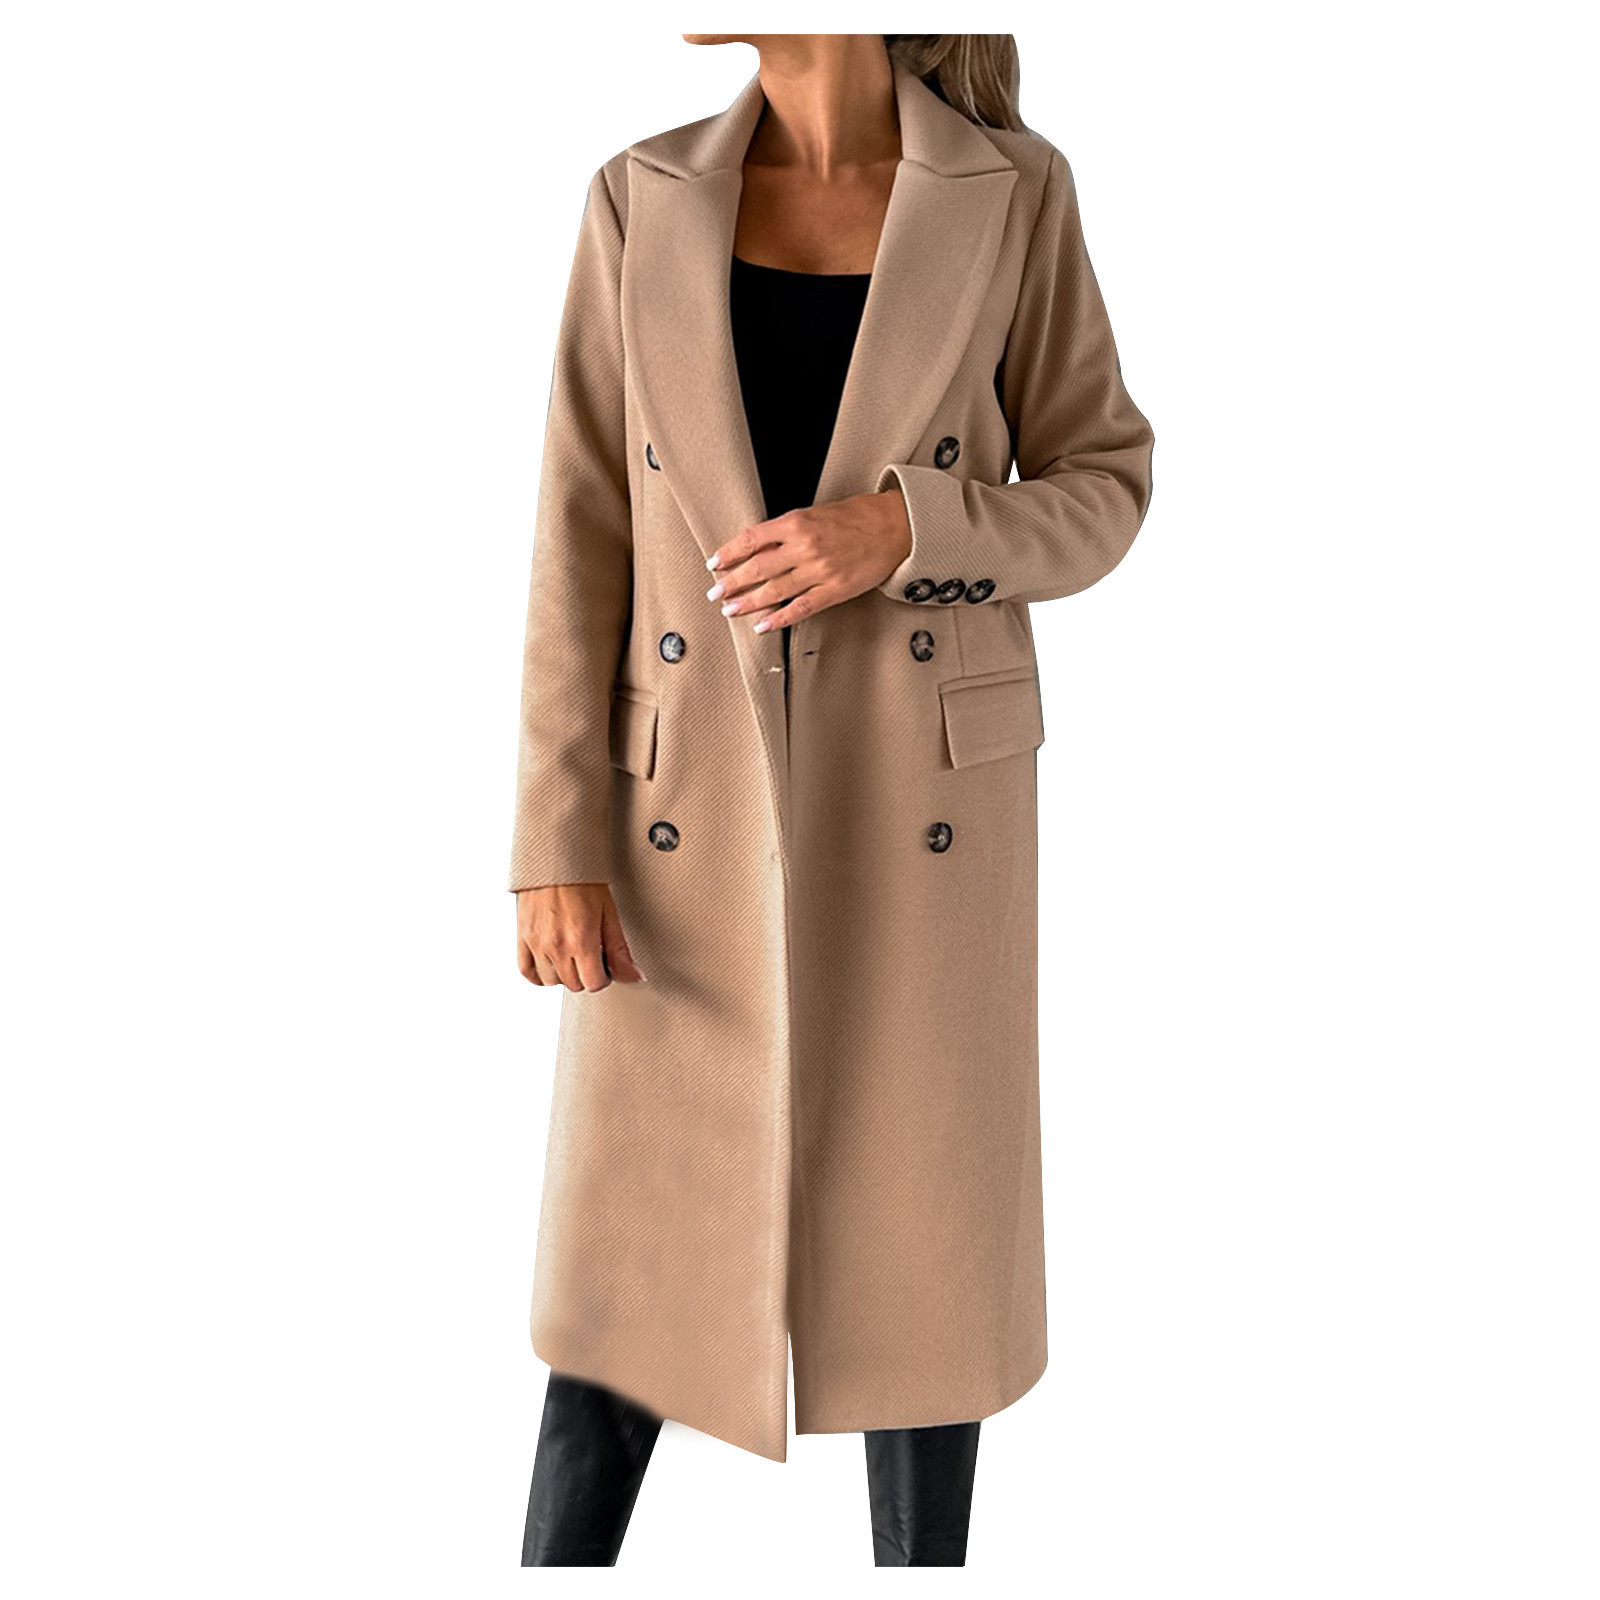 Hfyihgf Women's Double Breasted Trench Coat Classic Notch Collar Long Sleeve Peacoats Winter Warm Slim Fit Long Woolen Jackets Coat with Pockets Clearance(Khaki,L) - image 1 of 5